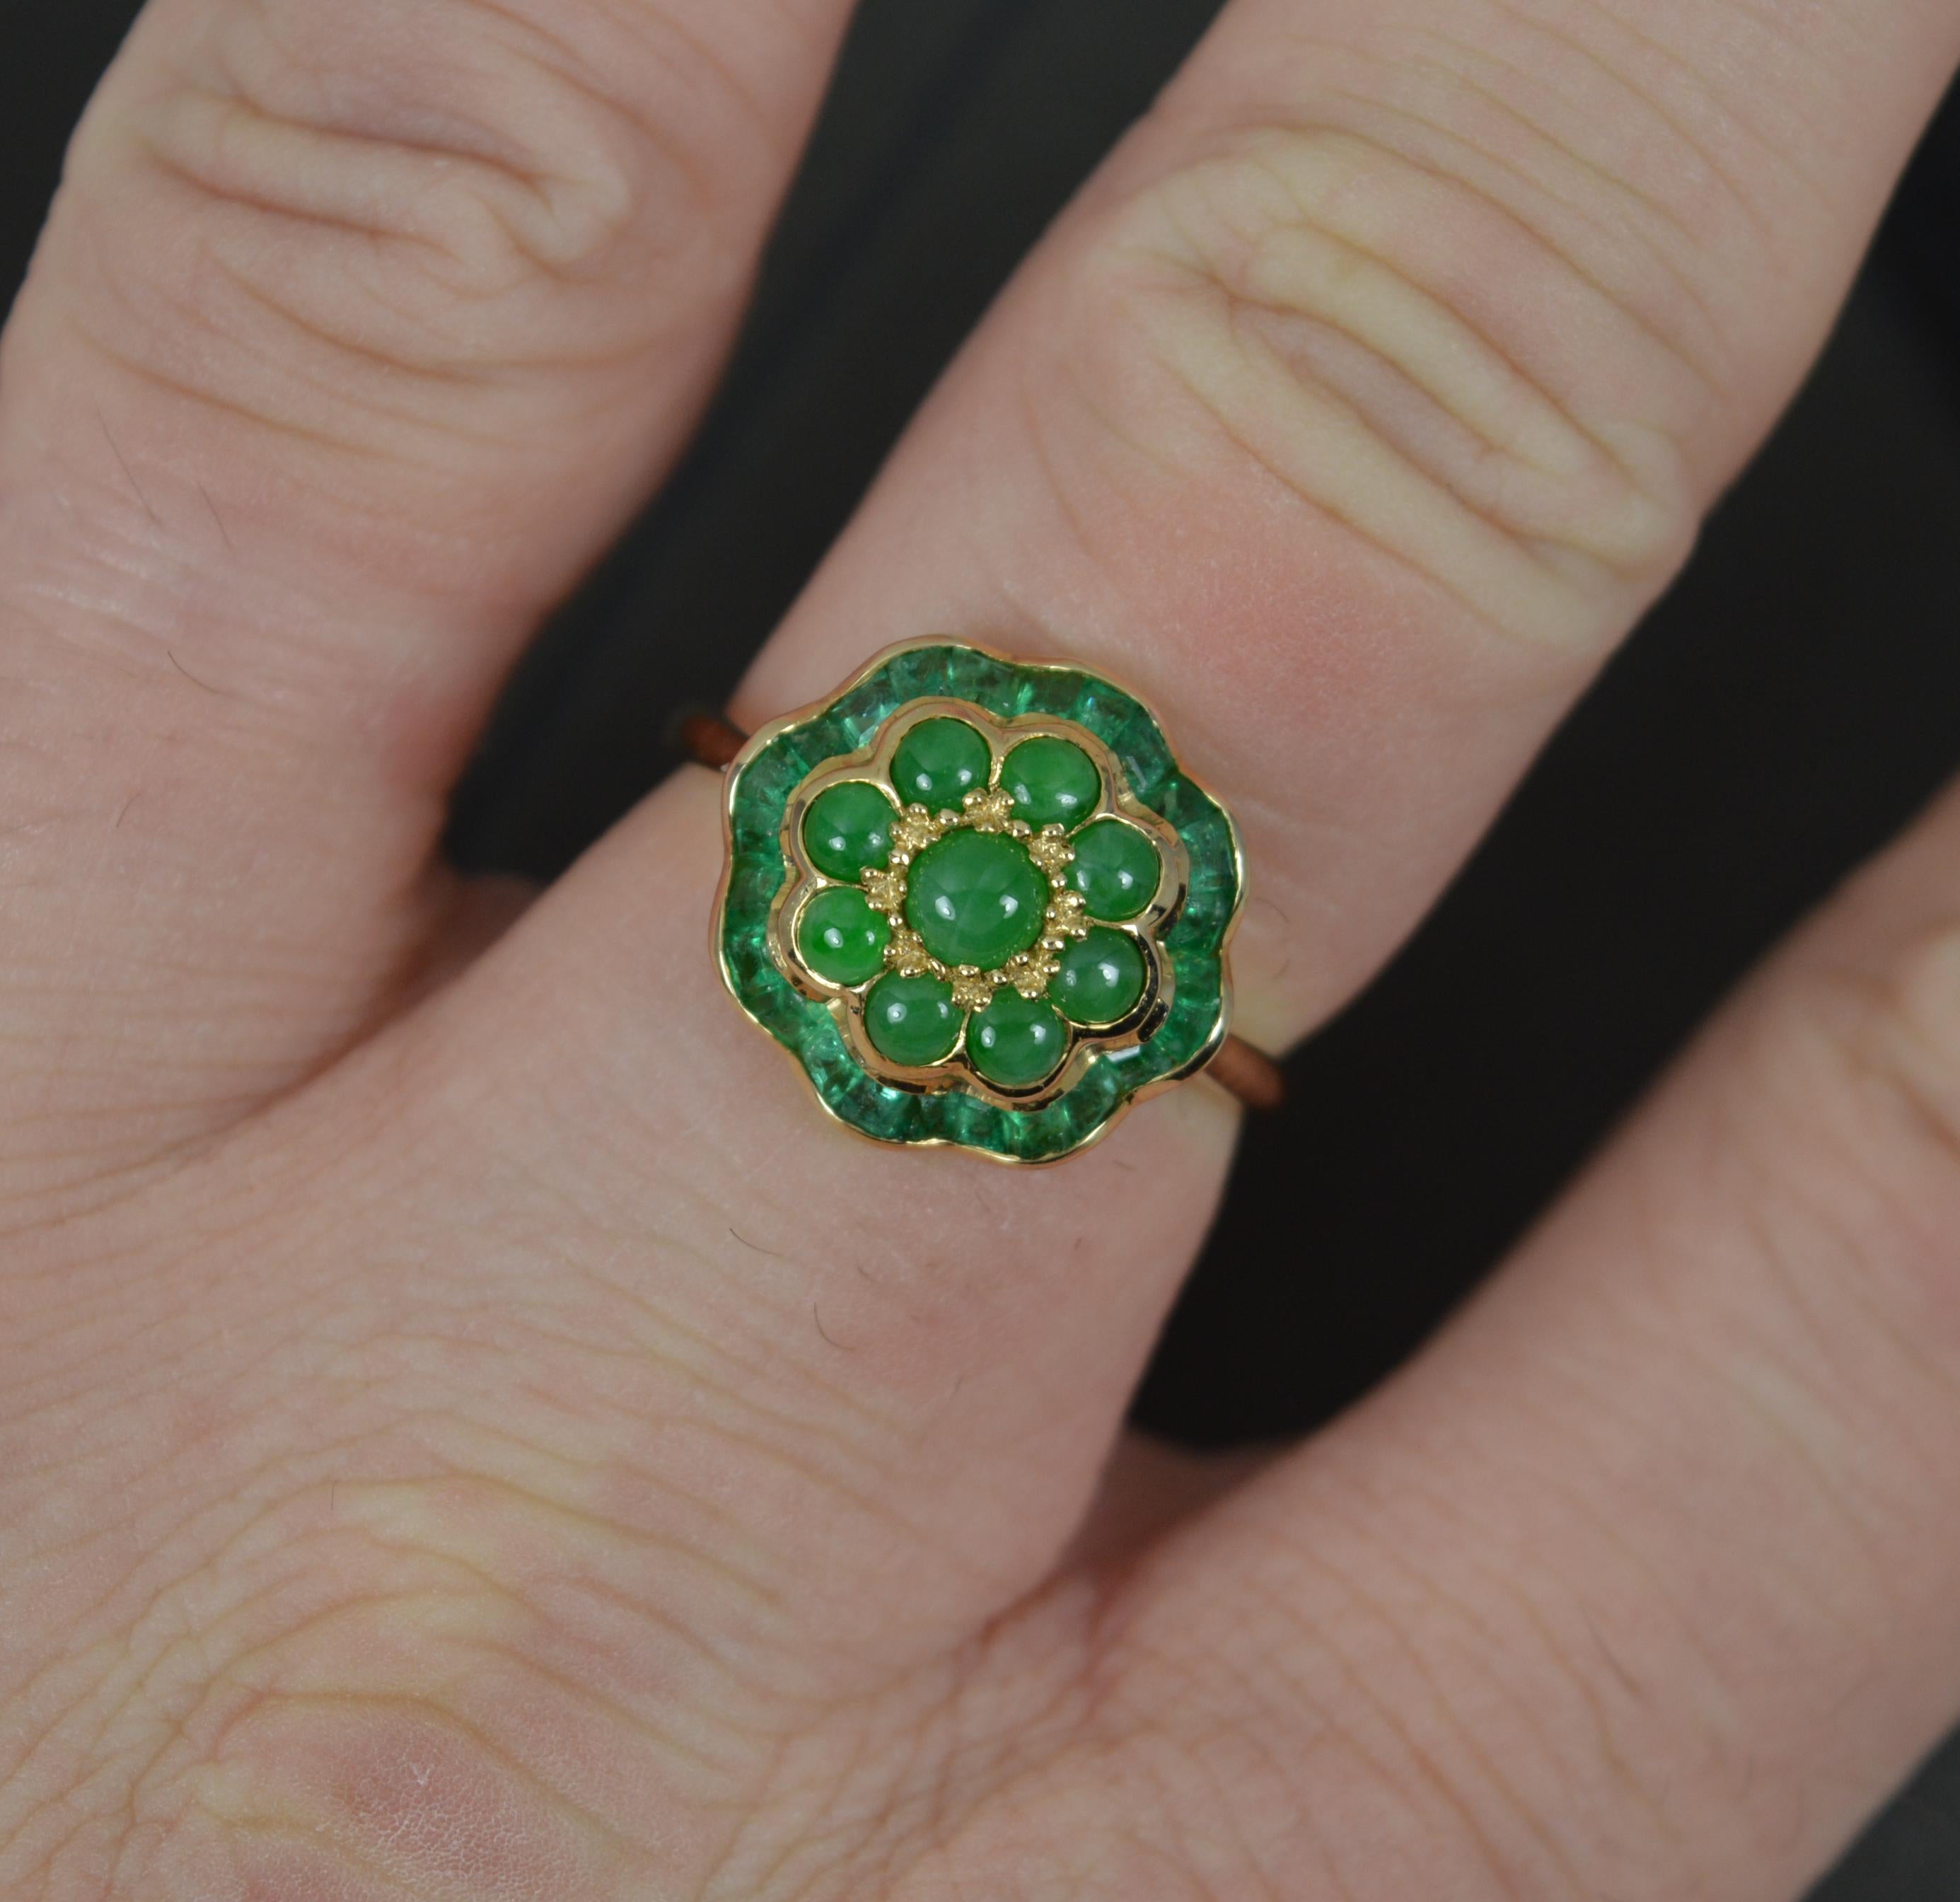 A Luke Stockley designer ring.
9 carat yellow gold example.
Designed with nine round shape green jade stones with a full border to the edge of many tapered cut green emeralds. All natural stones. 
14.5mm x 13.7mm cluster.

Condition ; Very good.